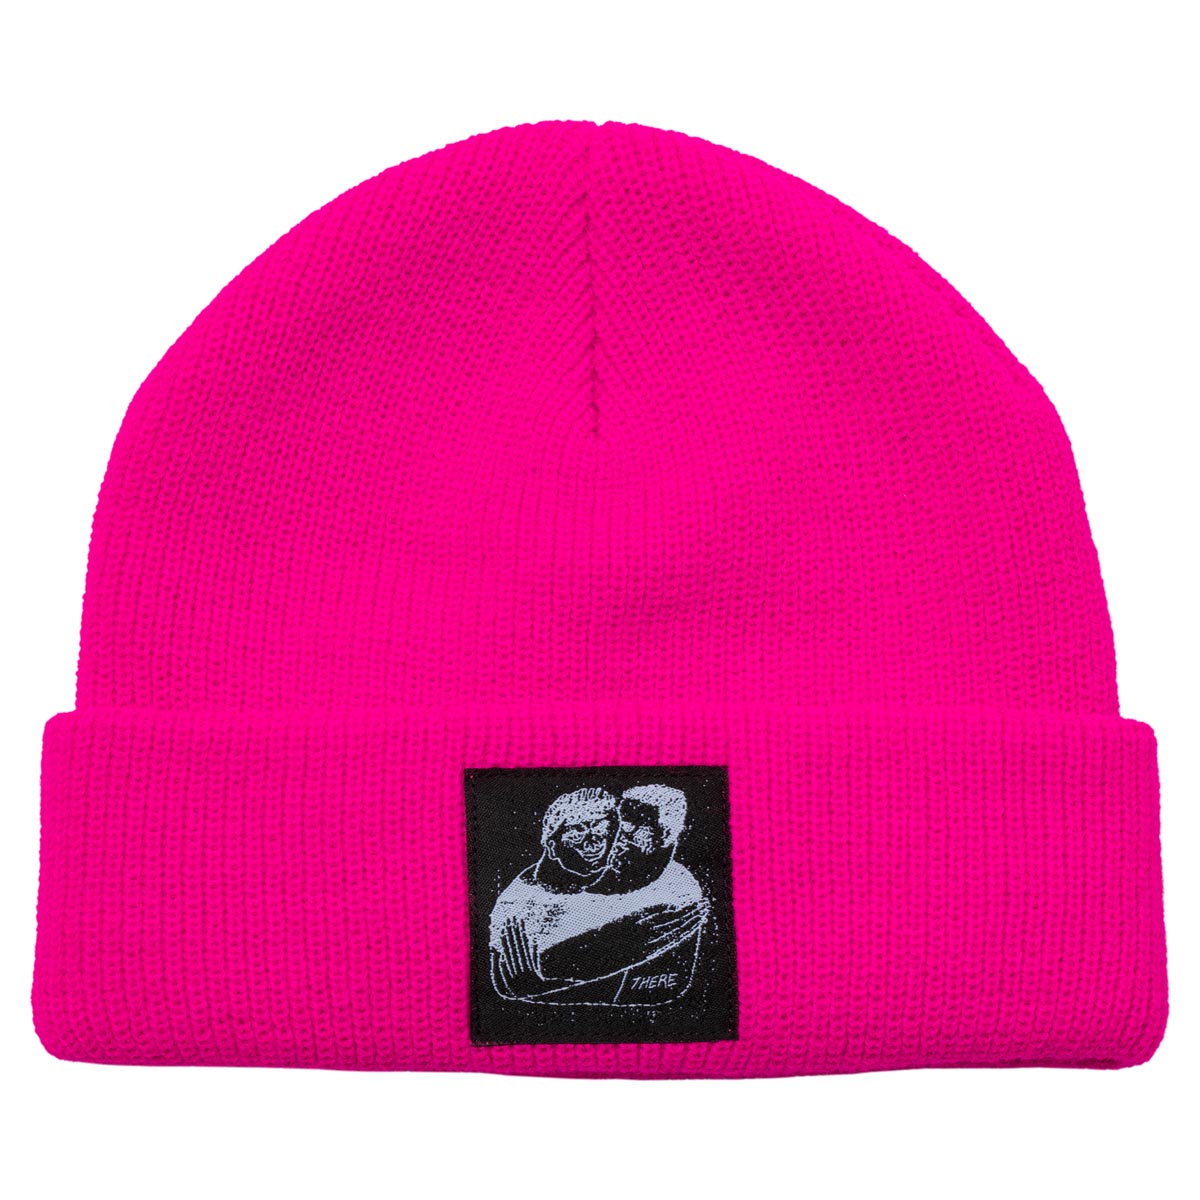 There Stuck With You Beanie - Pink image 1